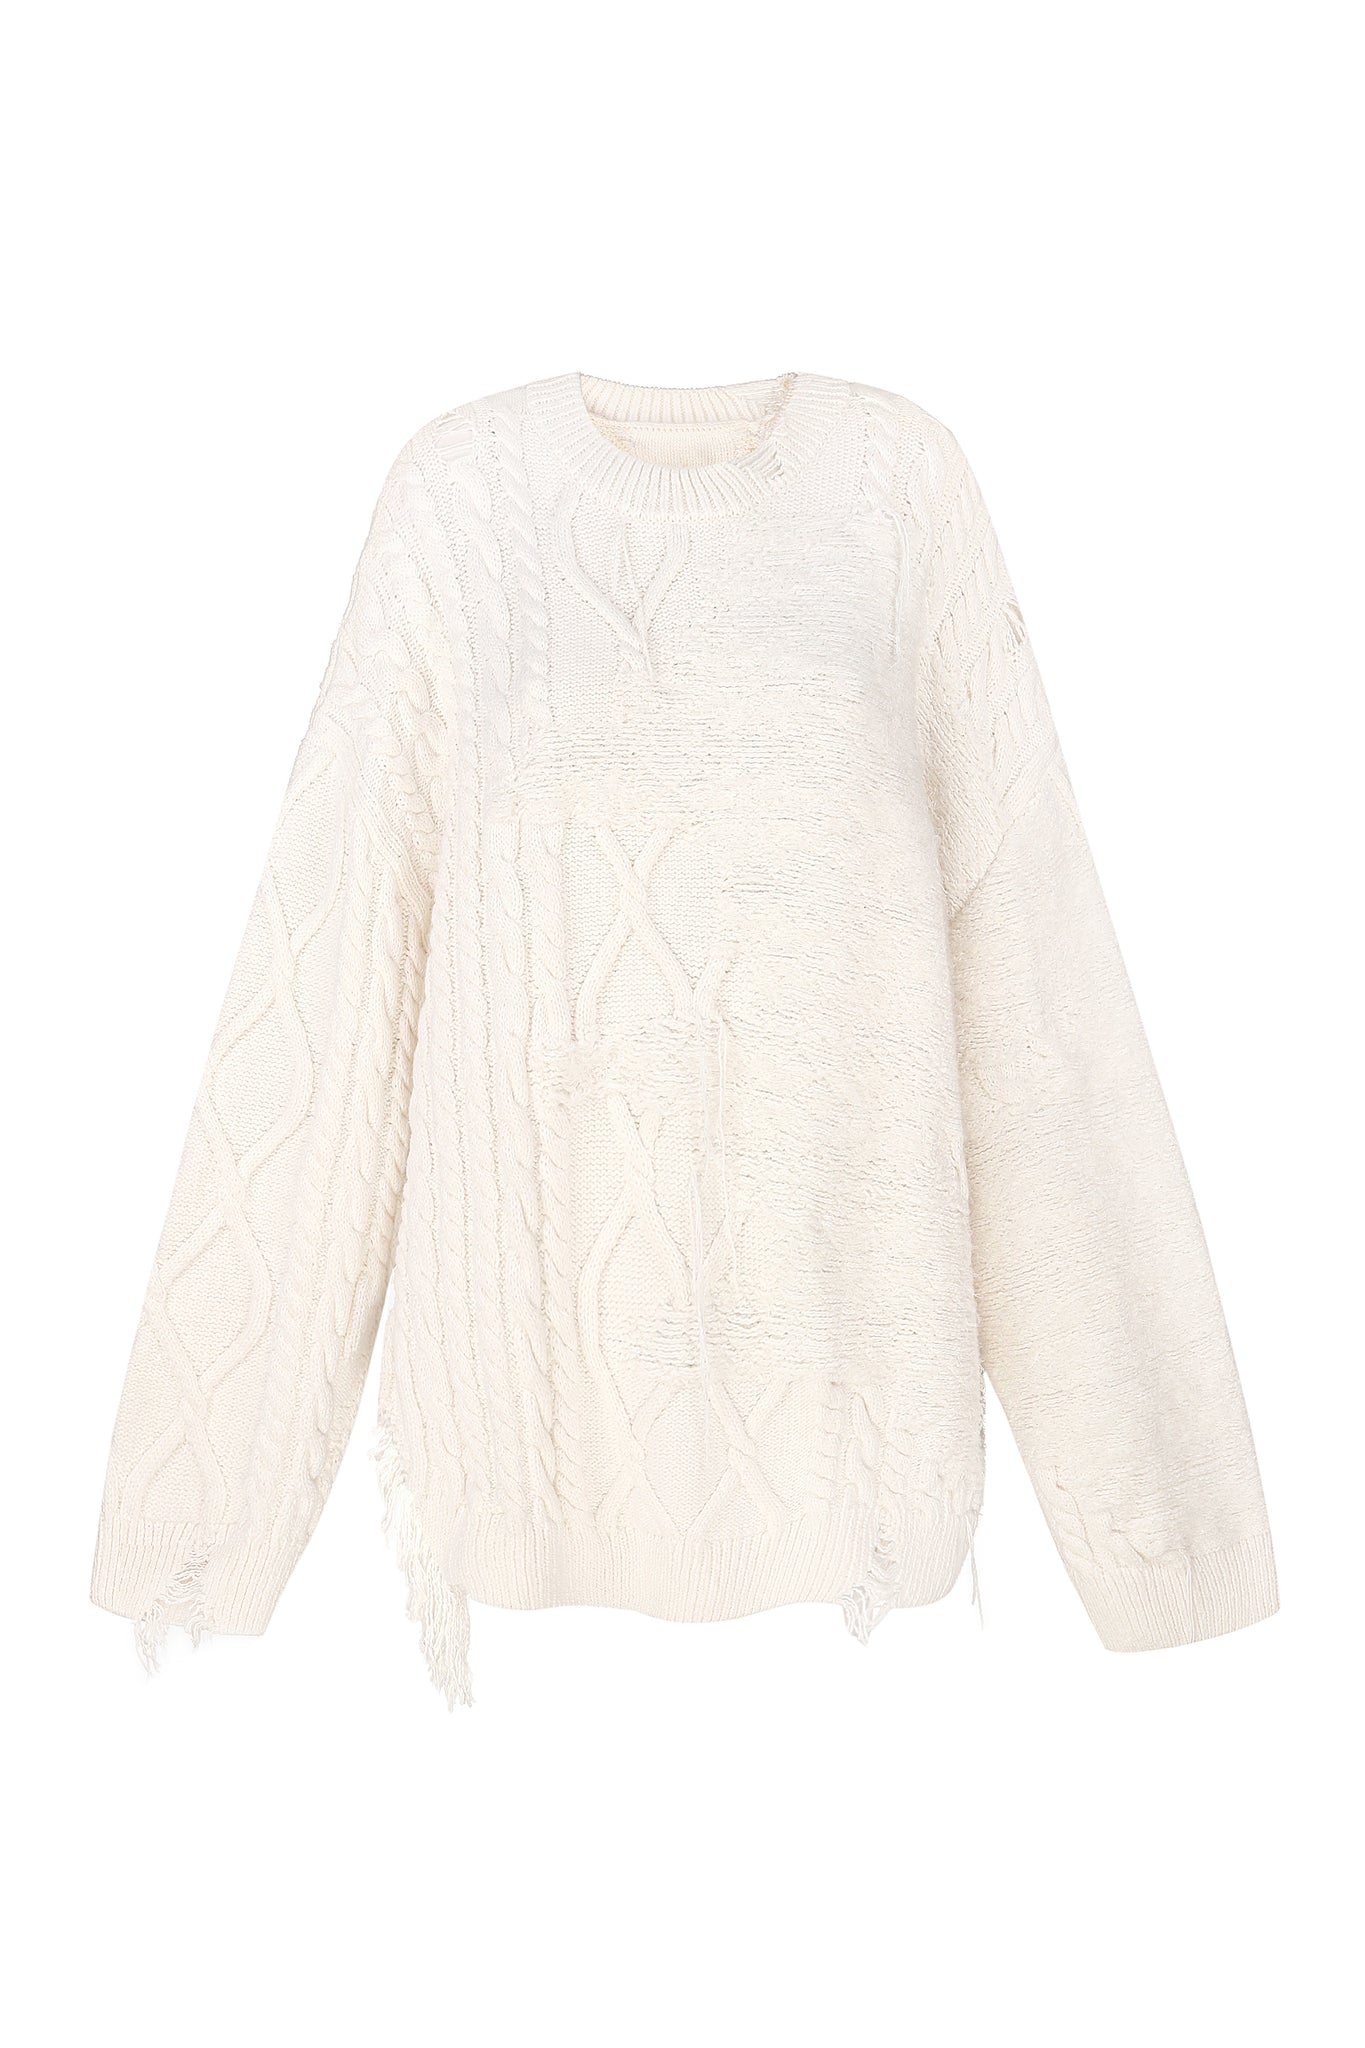 LAPOO Knitted Sweater